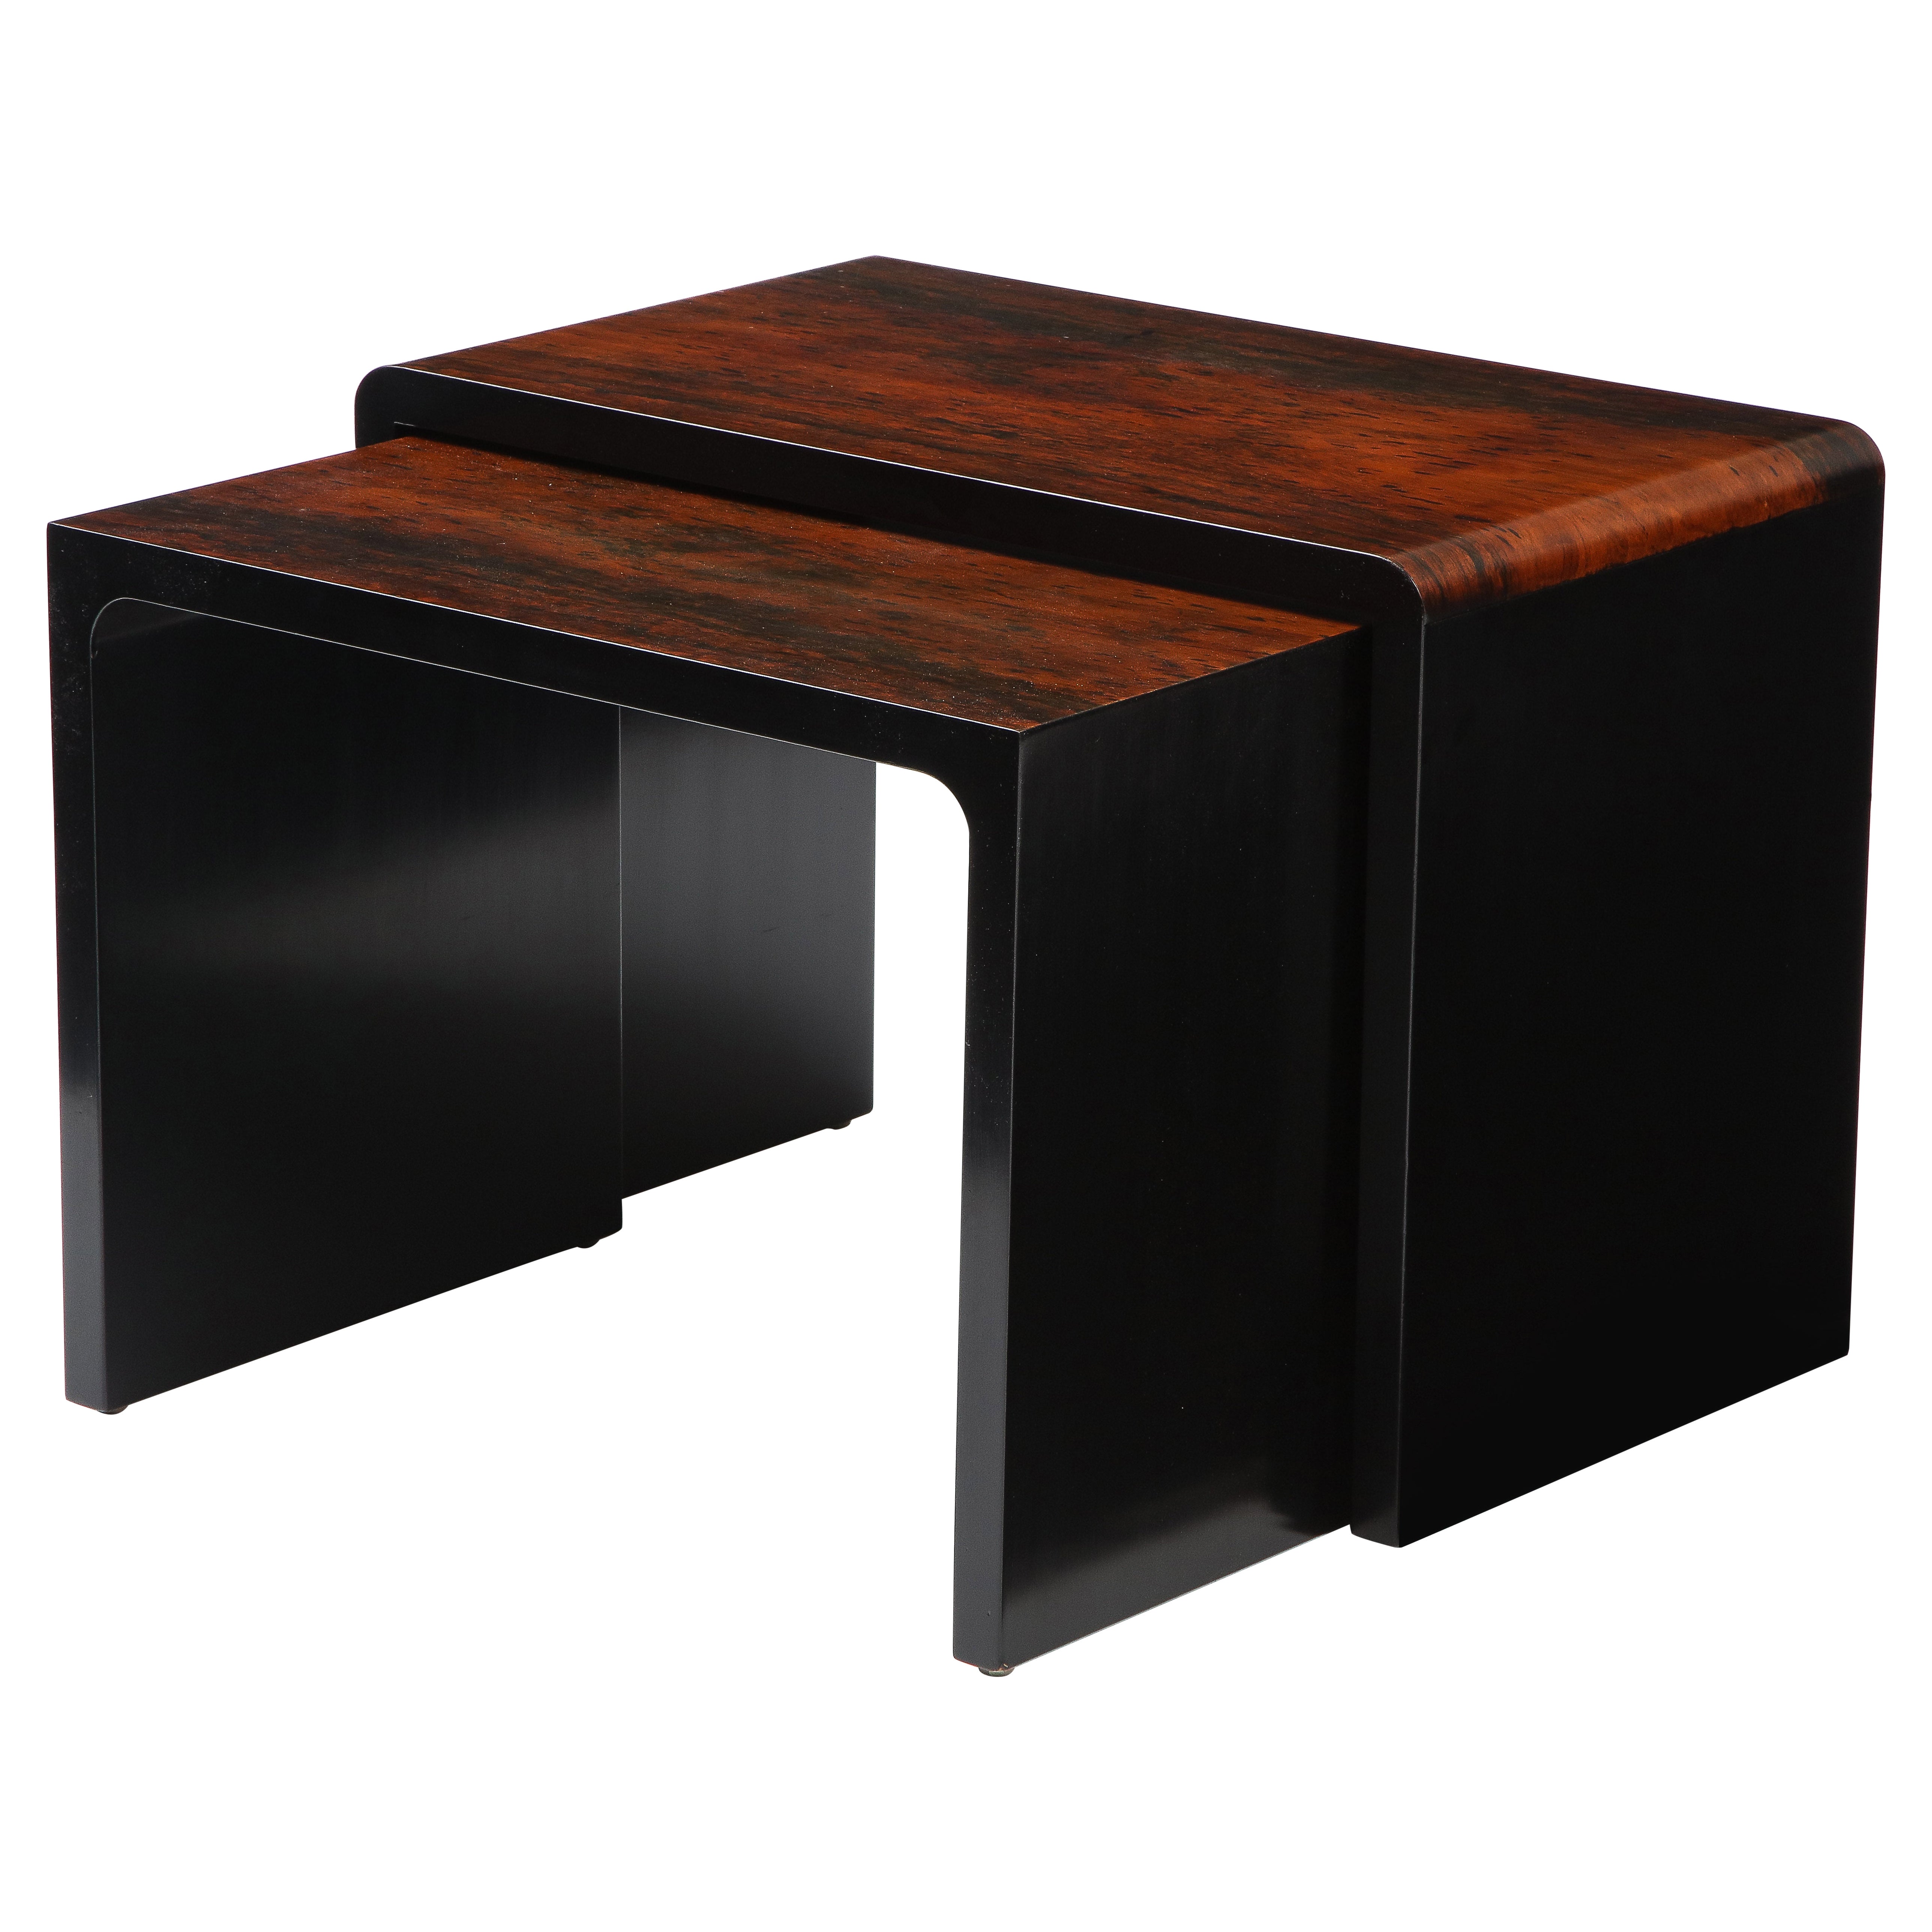 Set of Italian Rosewood and Ebony Lacquered Nesting Tables, circa 1970 For Sale